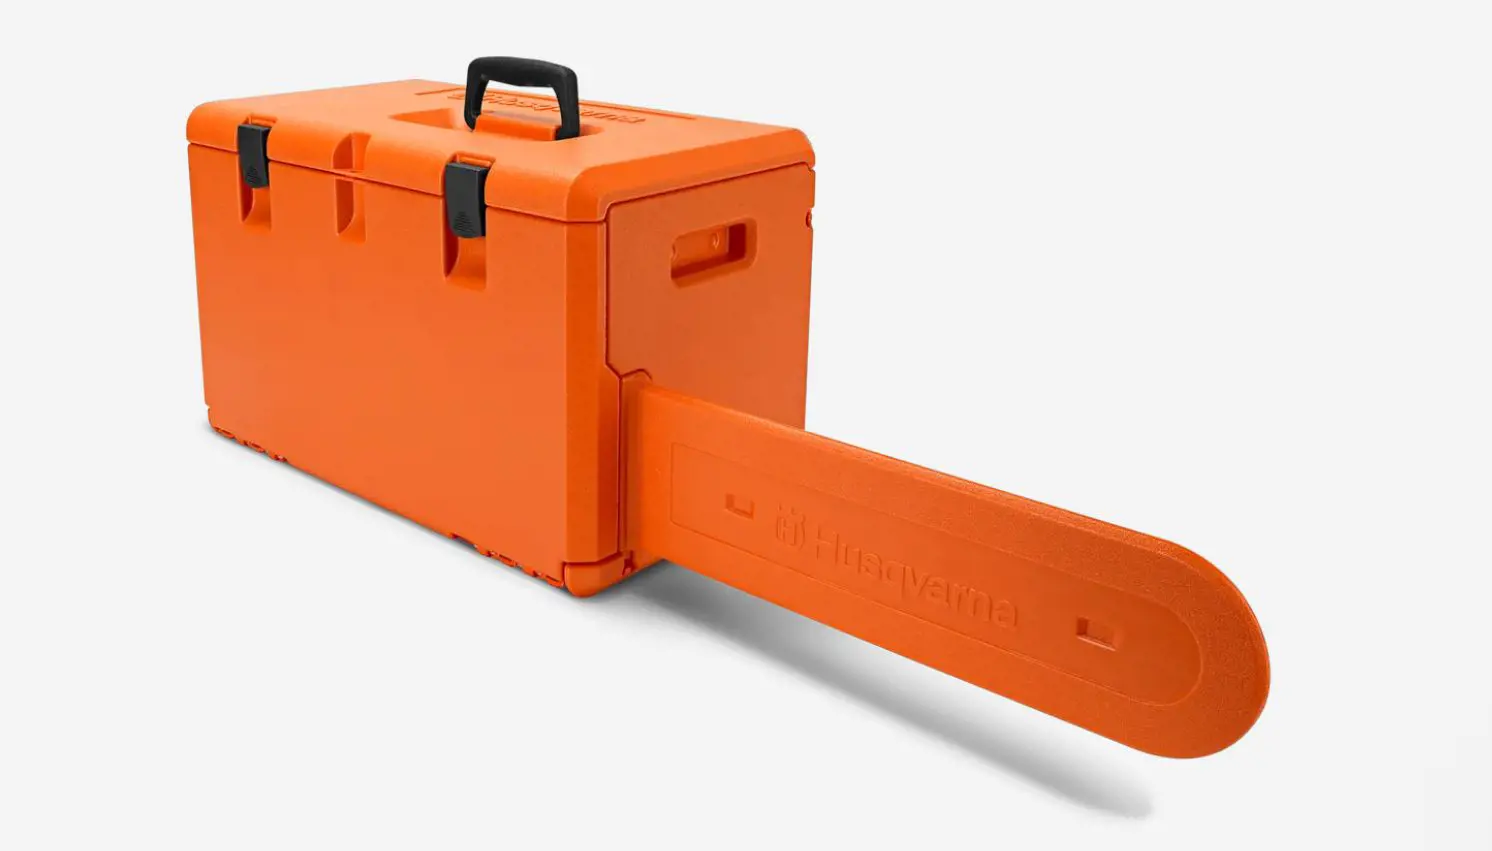 Image 1 for #100000107 Husqvarna Powerbox Chainsaw Carrying Case